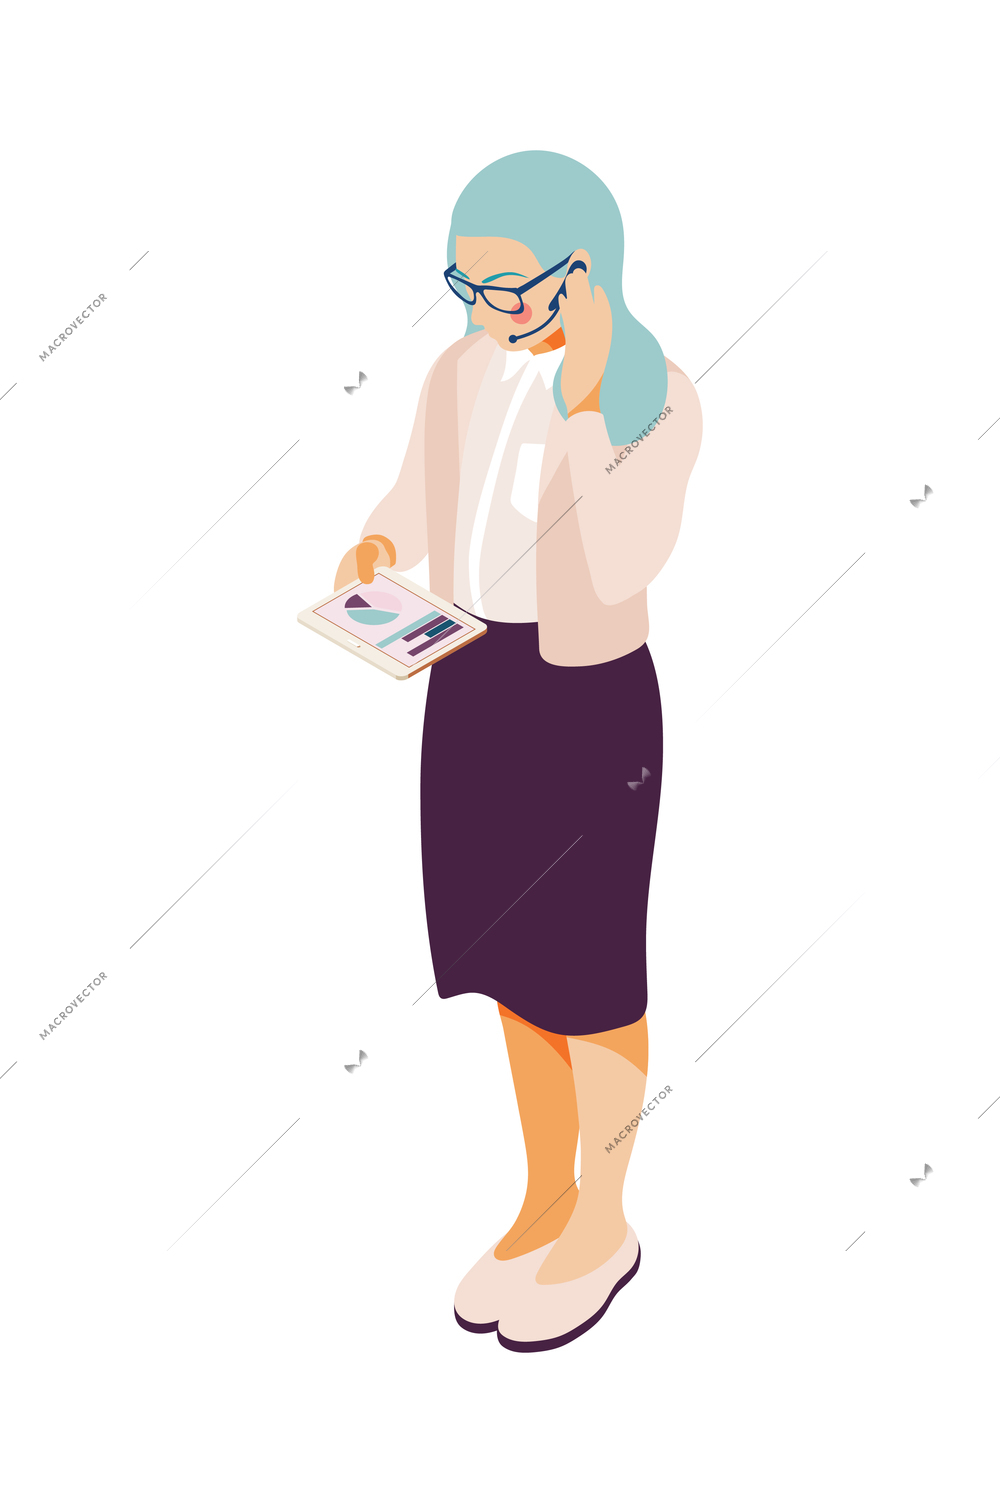 Effective management concept icon with woman talking on phone and looking at financial chart on tablet screen 3d vector illustration